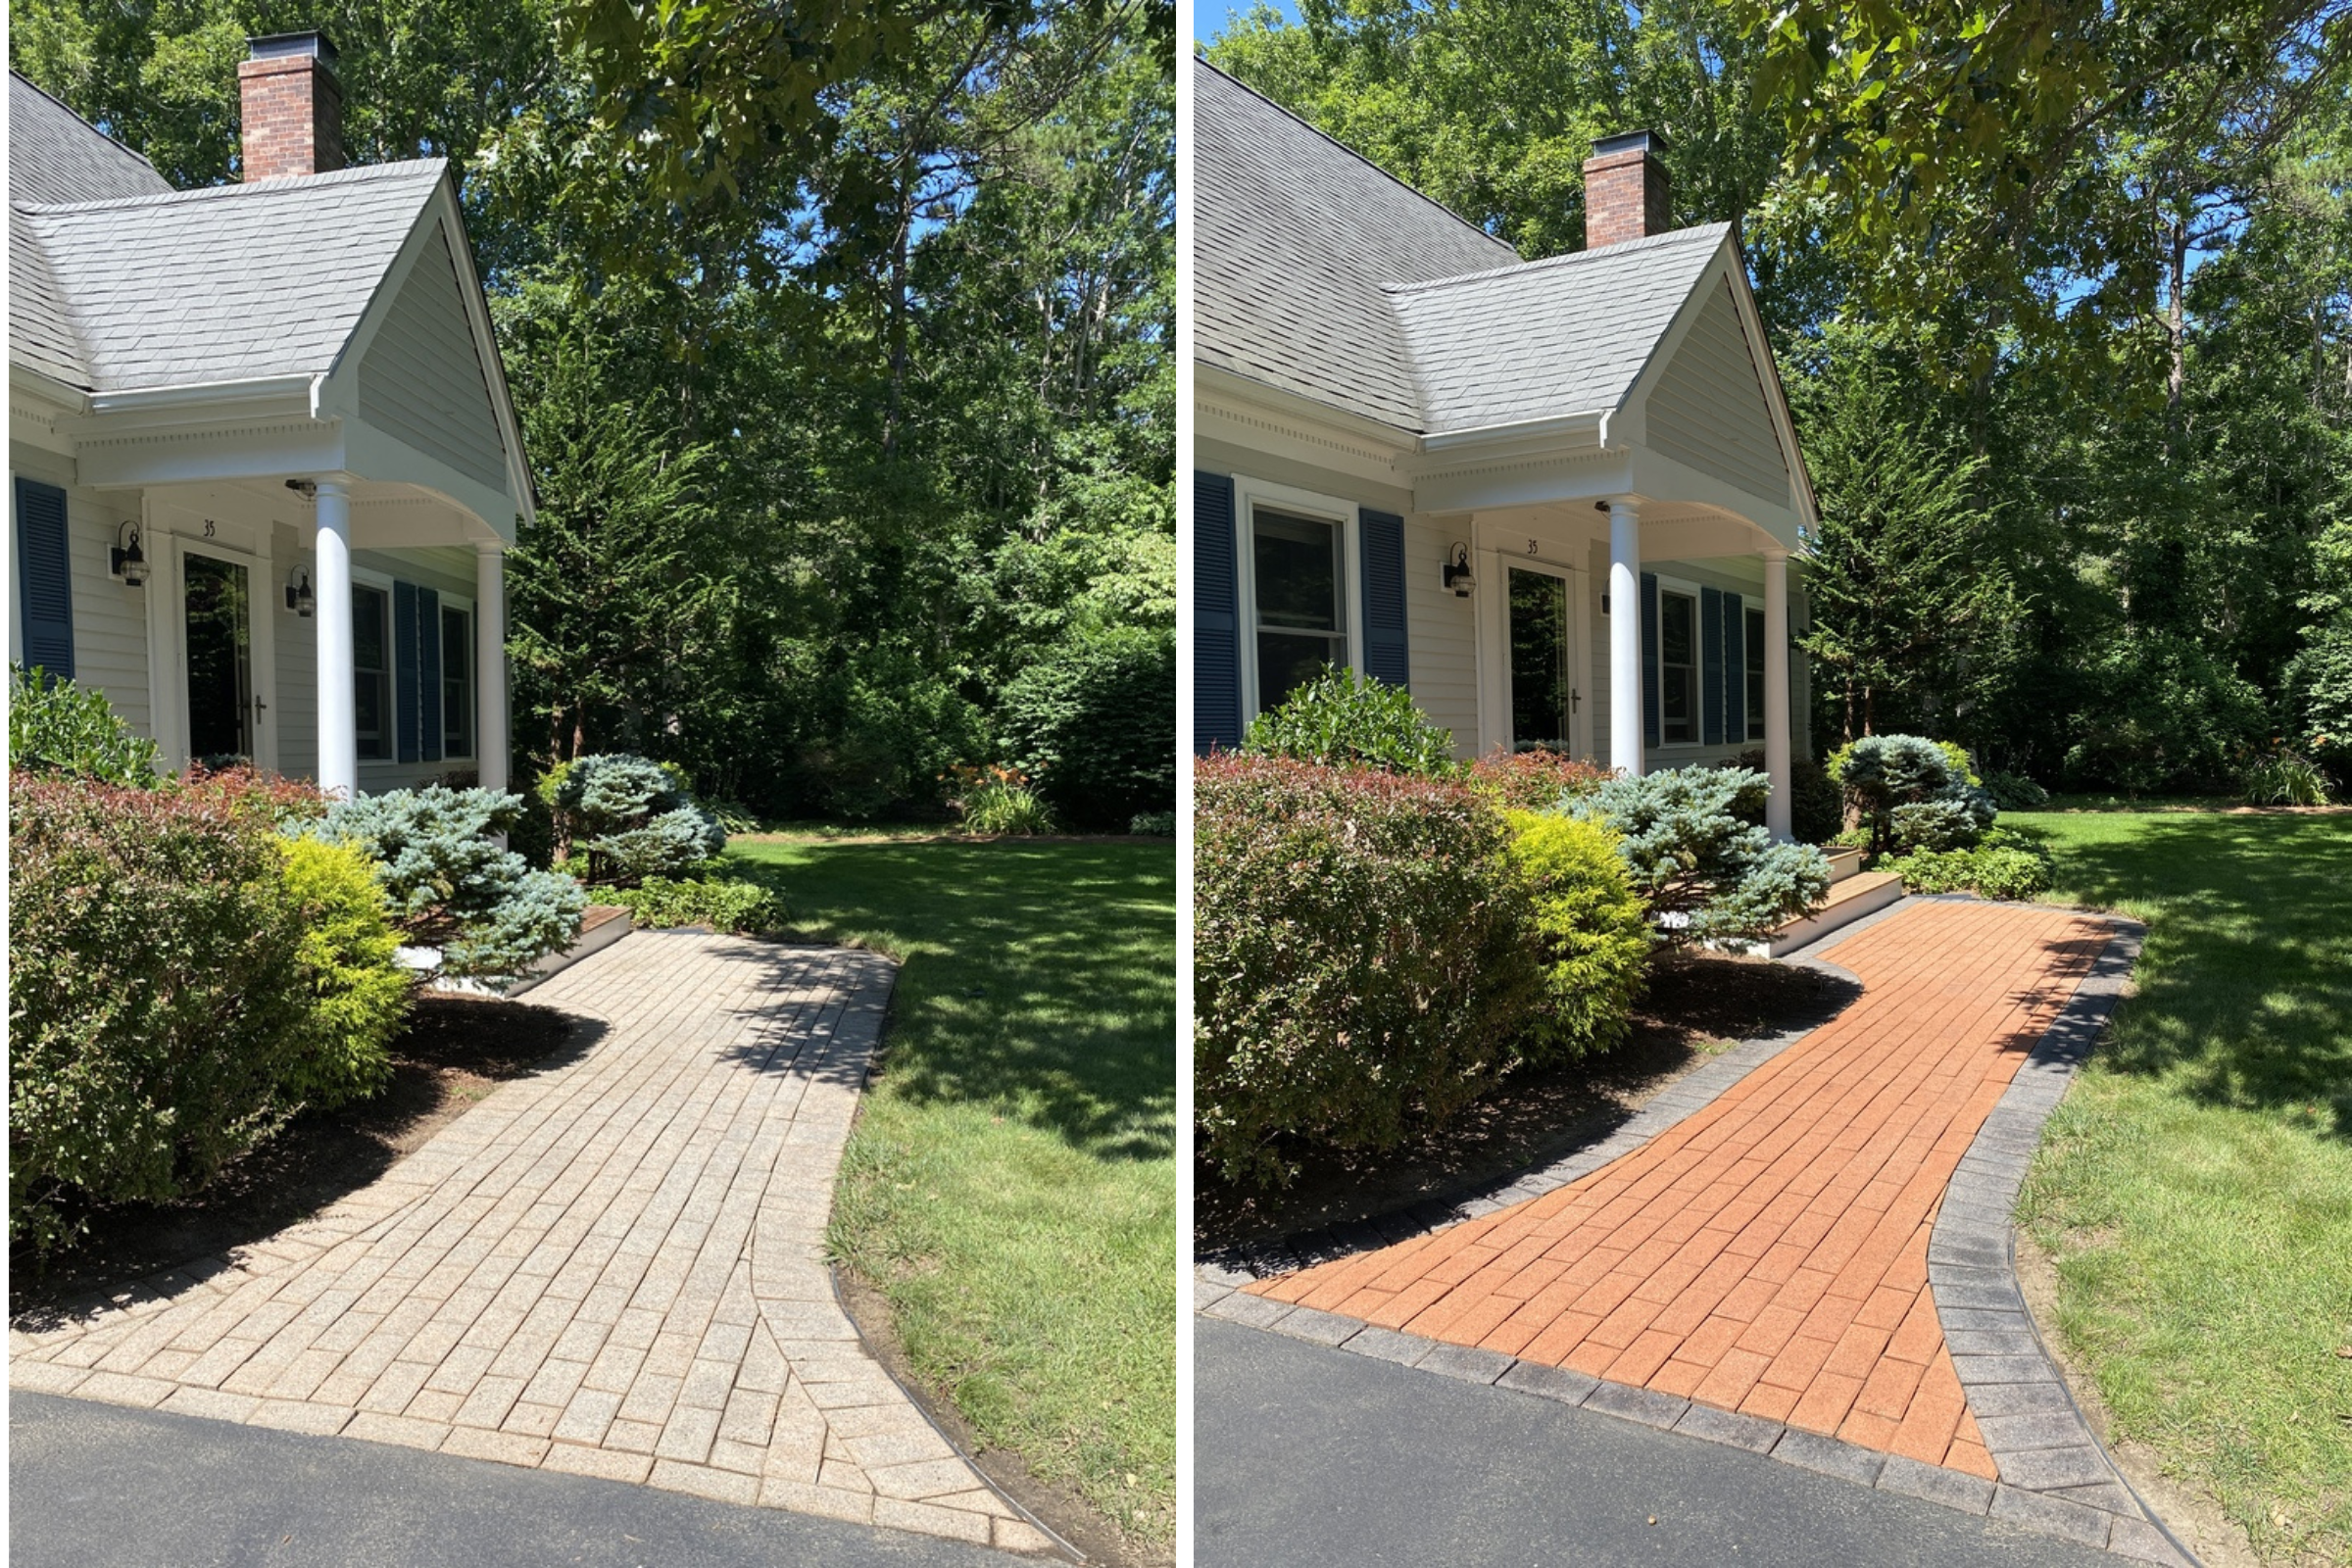 Before and after images of a front porch walkway restoration. The left photo shows the original discolored pavers. The right photo features the same walkway after restoration, with the pavers in a vibrant terracotta color, complemented by a charcoal edge border, enhancing the home's welcoming appeal.